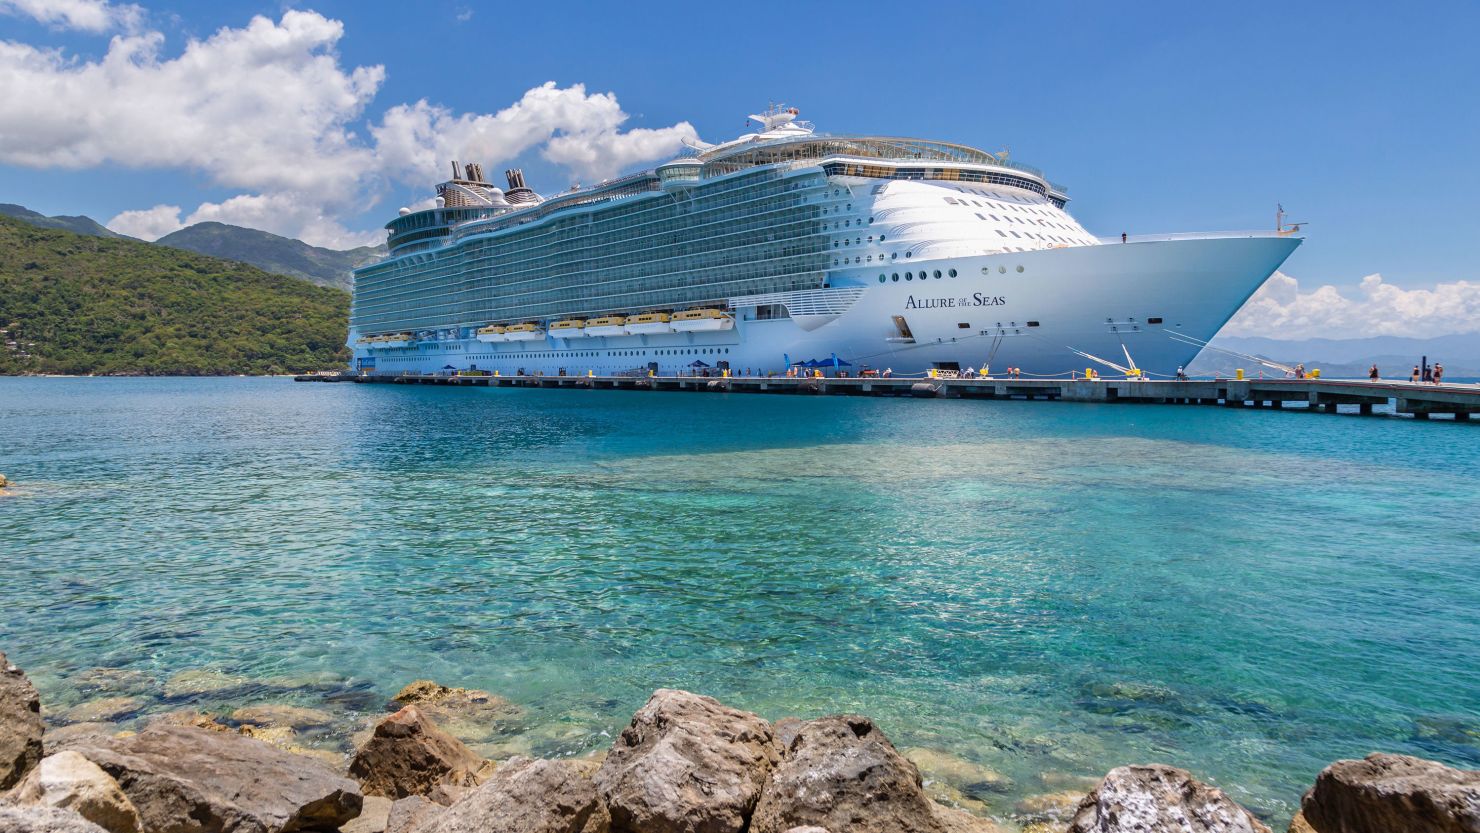 Allure of the Seas cruise ship is pictured in a 2018 photo at the pier in Labadee.